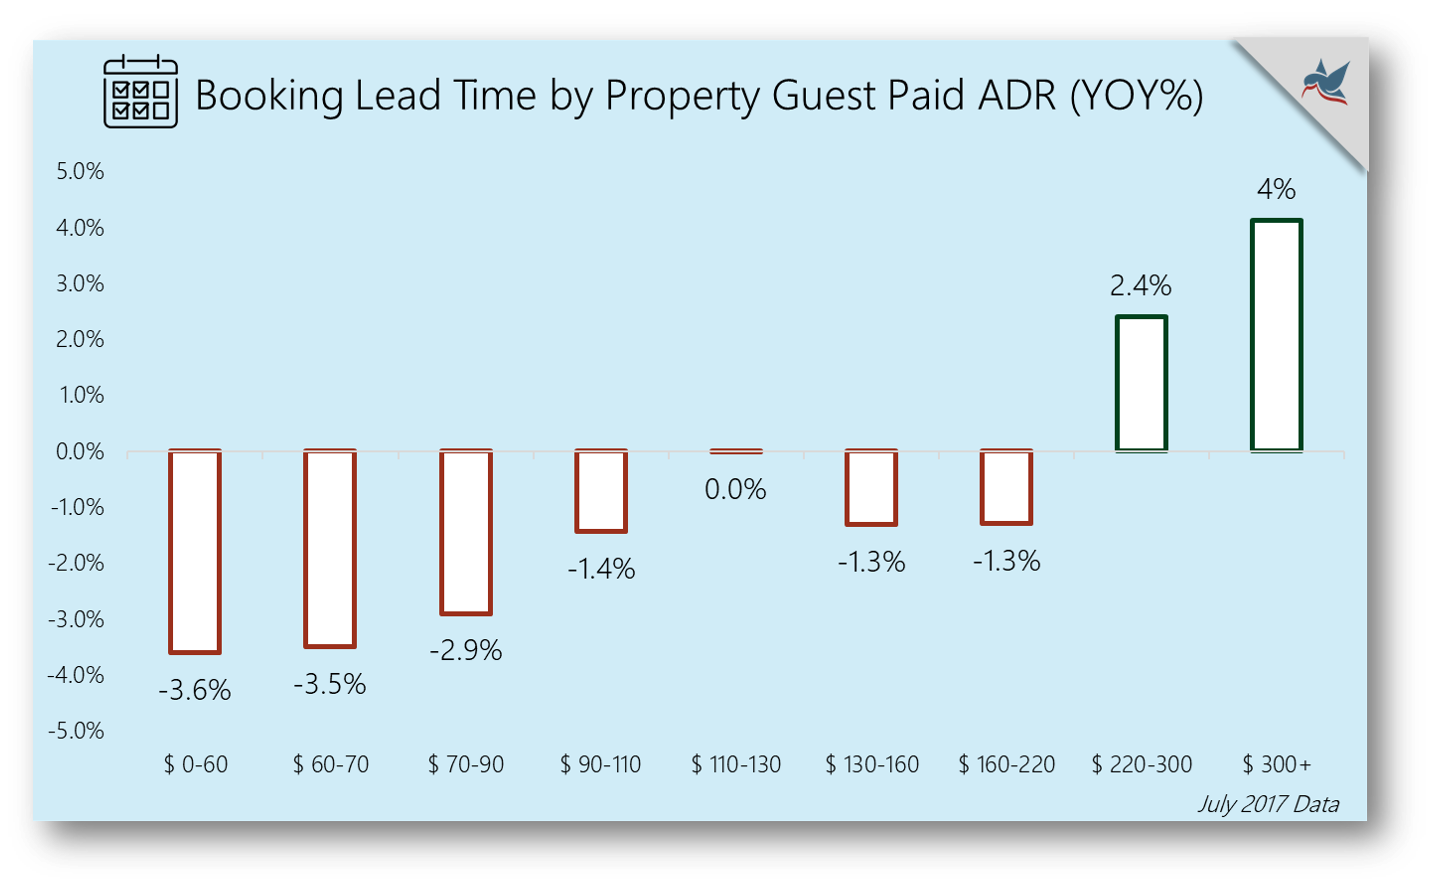 Property Guest Paid ADR